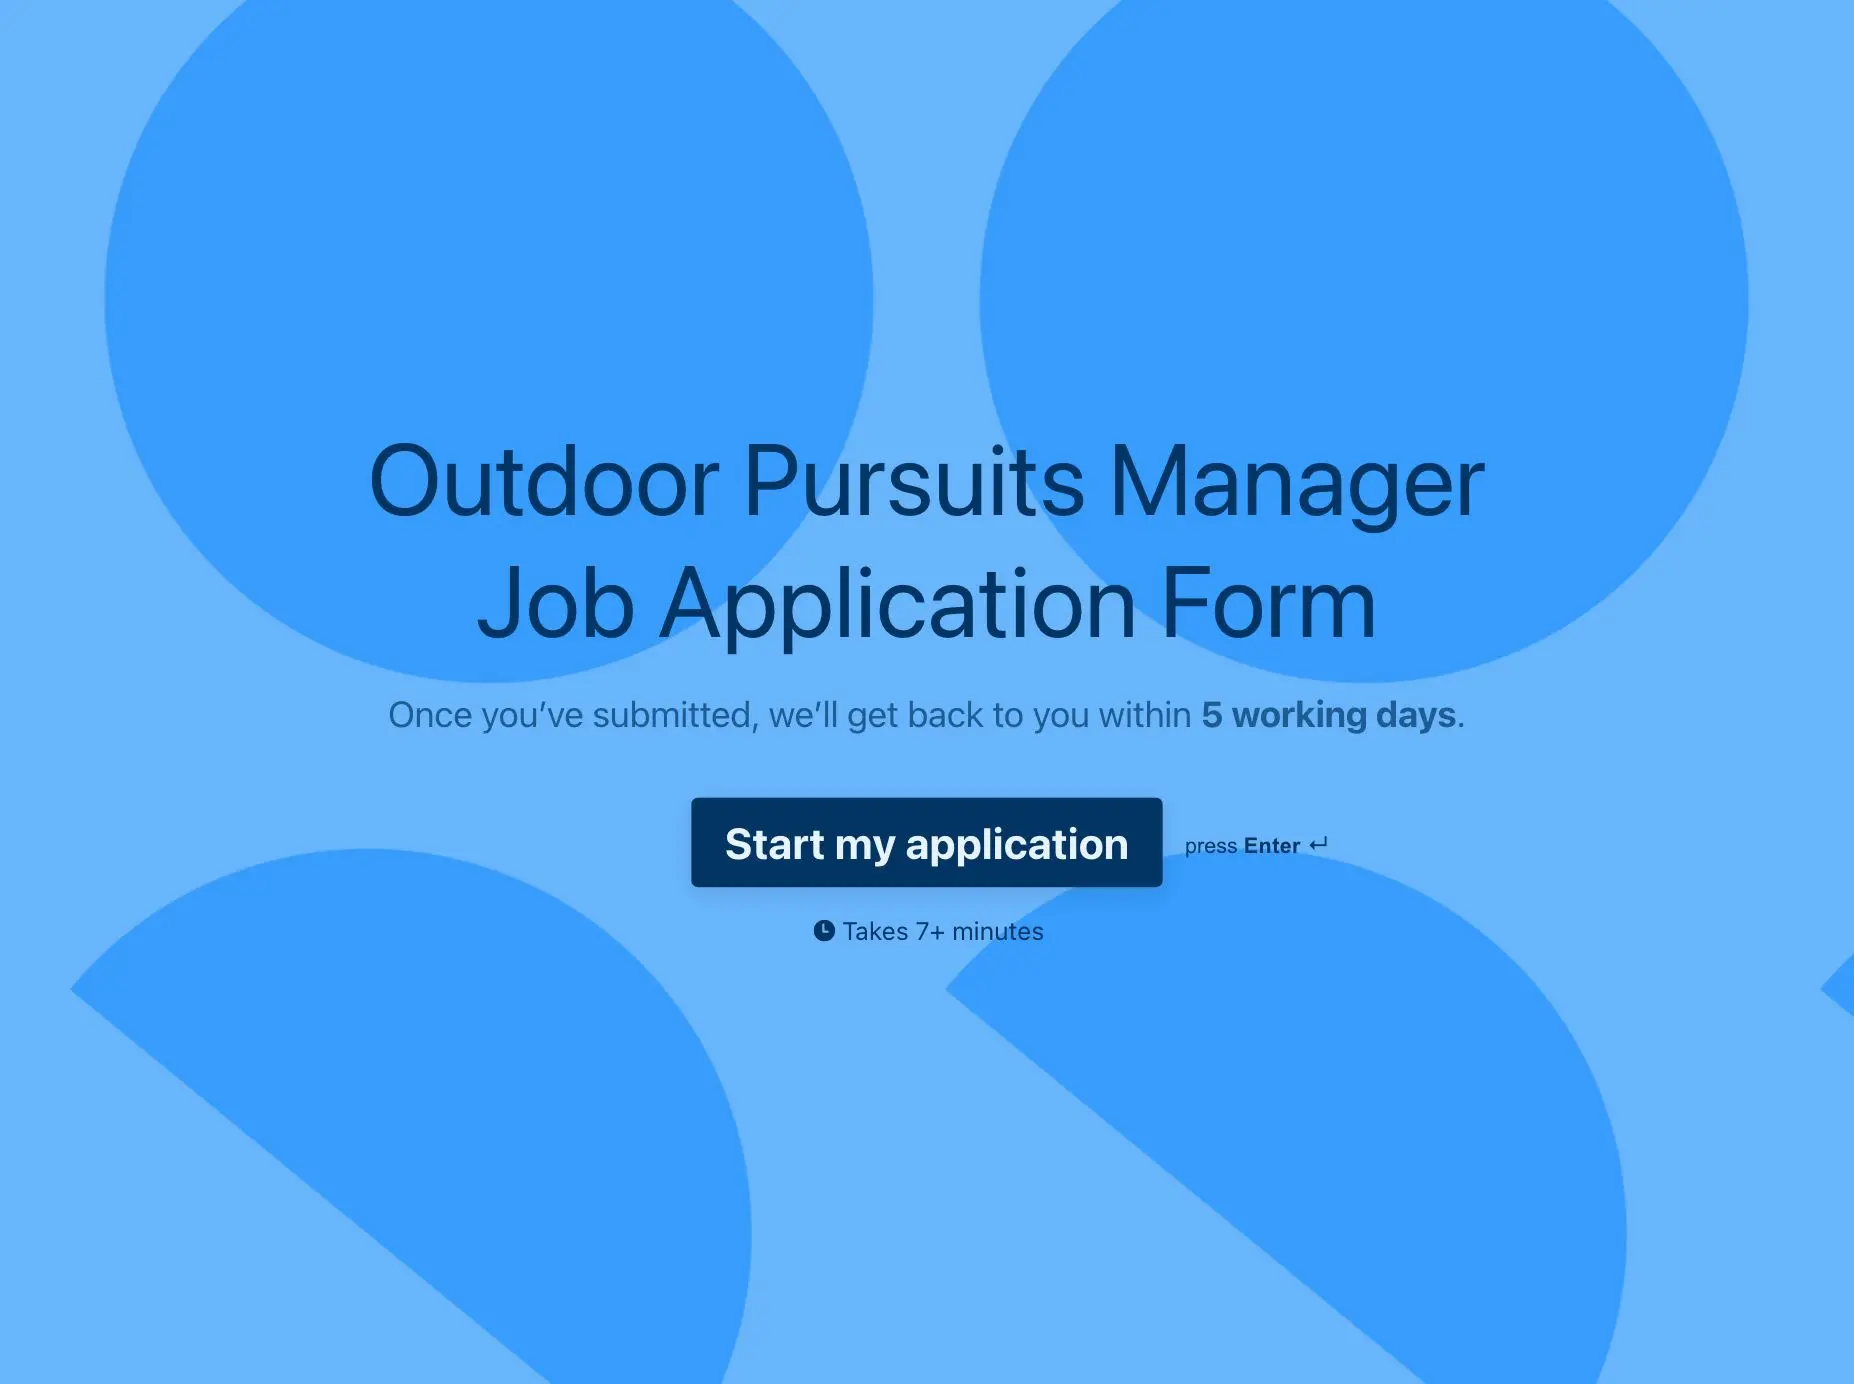 Outdoor Pursuits Manager Job Application Form Template Hero